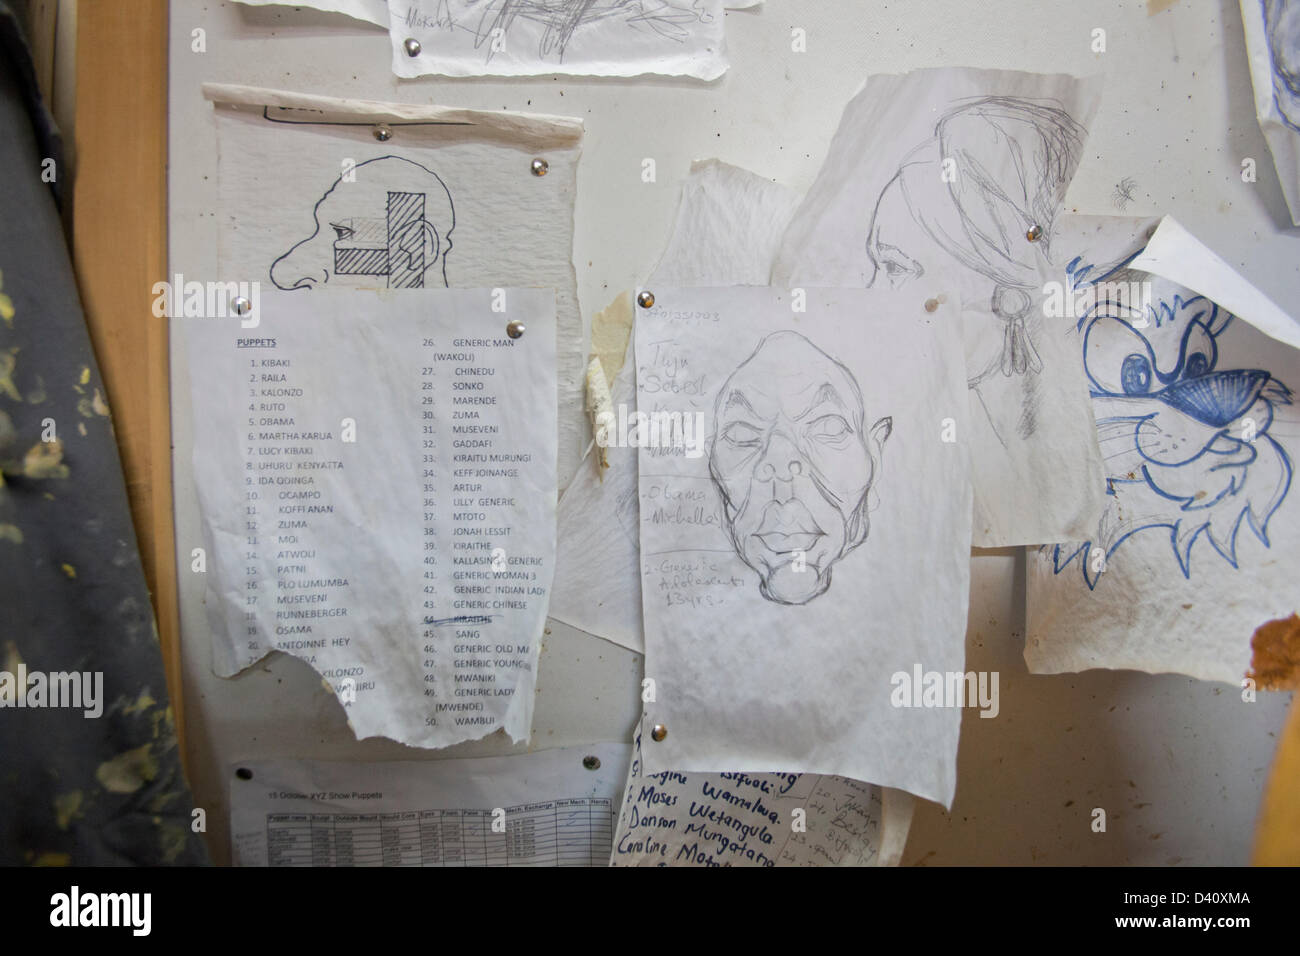 Nairobi, Kenya. 26th Feb 2013. Behind the scenes of Kenya's political satire 'The XYZ Show'. Caricature sketches on a pin board. Stock Photo